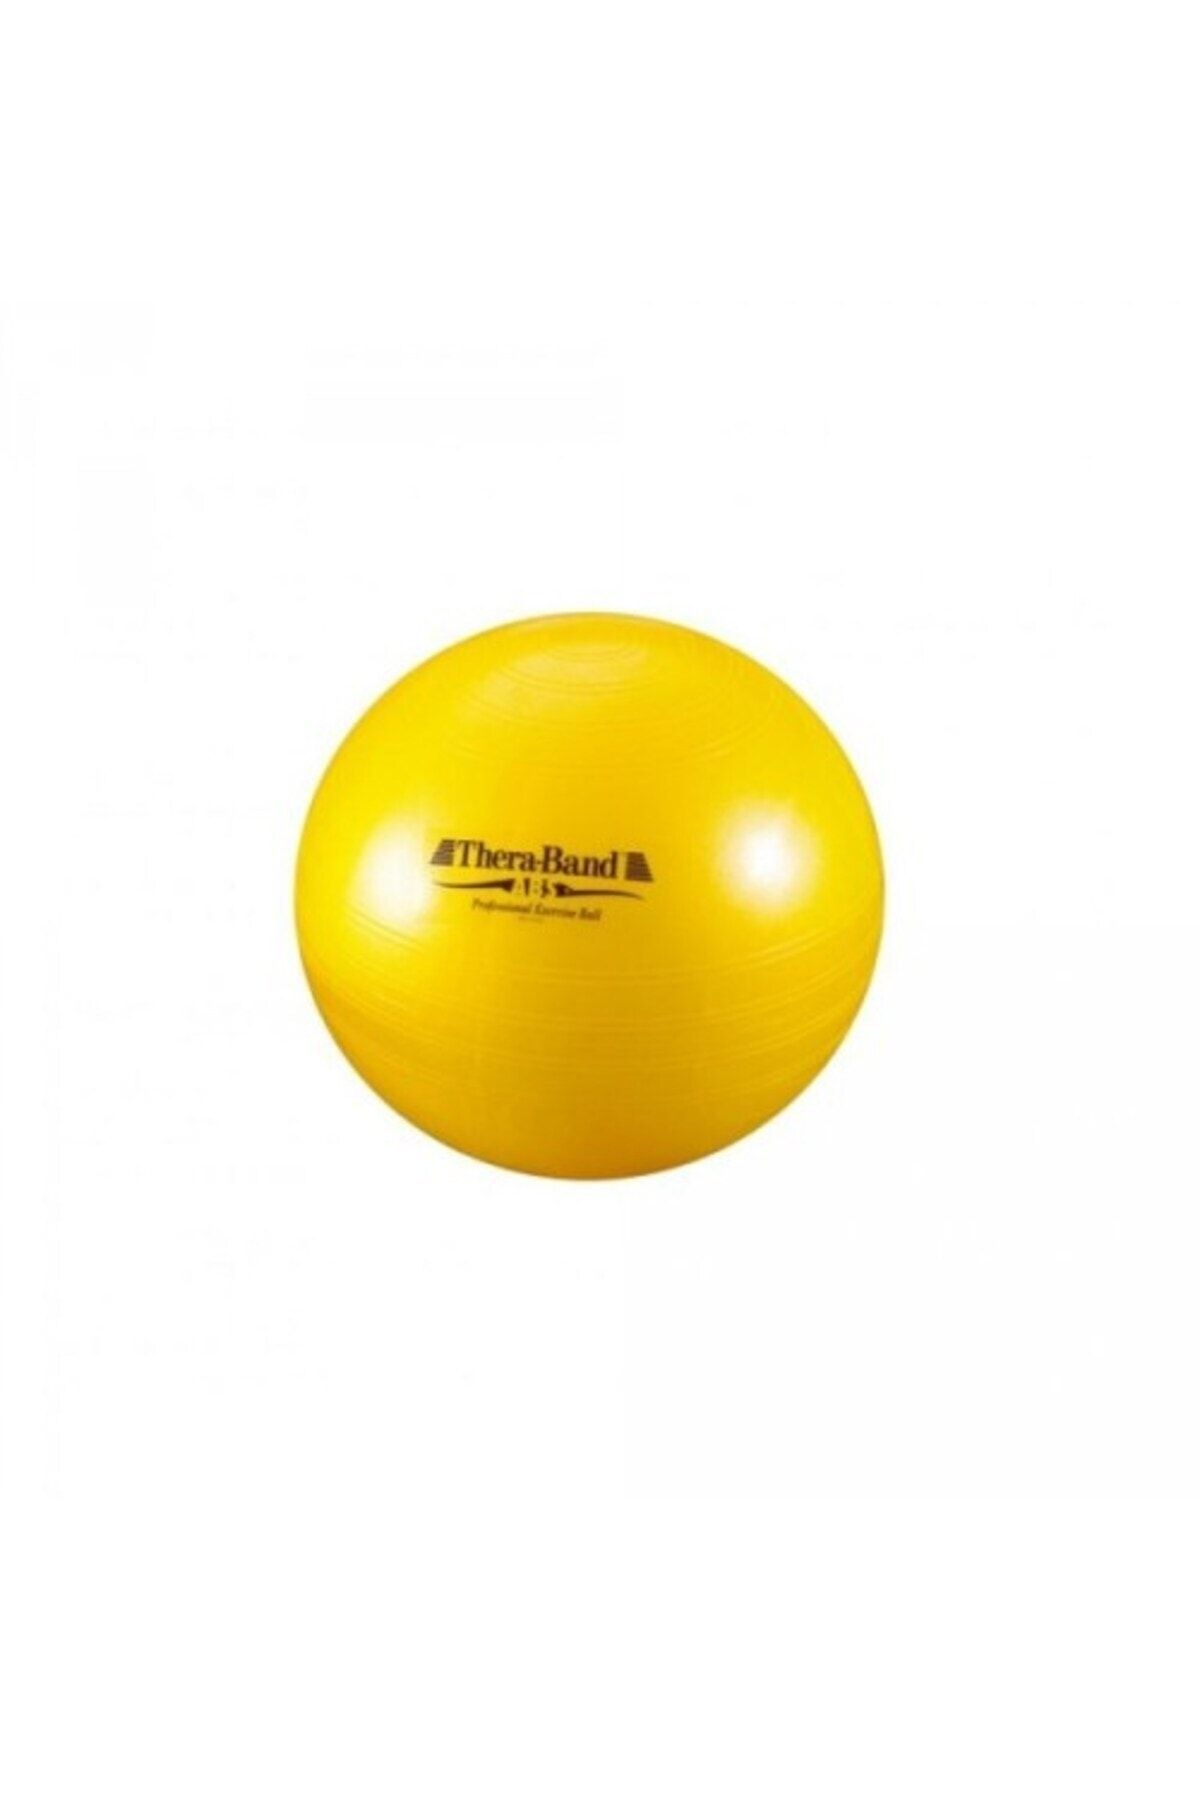 Theraband ABS YELLOW 45CM EXERCISE BALL